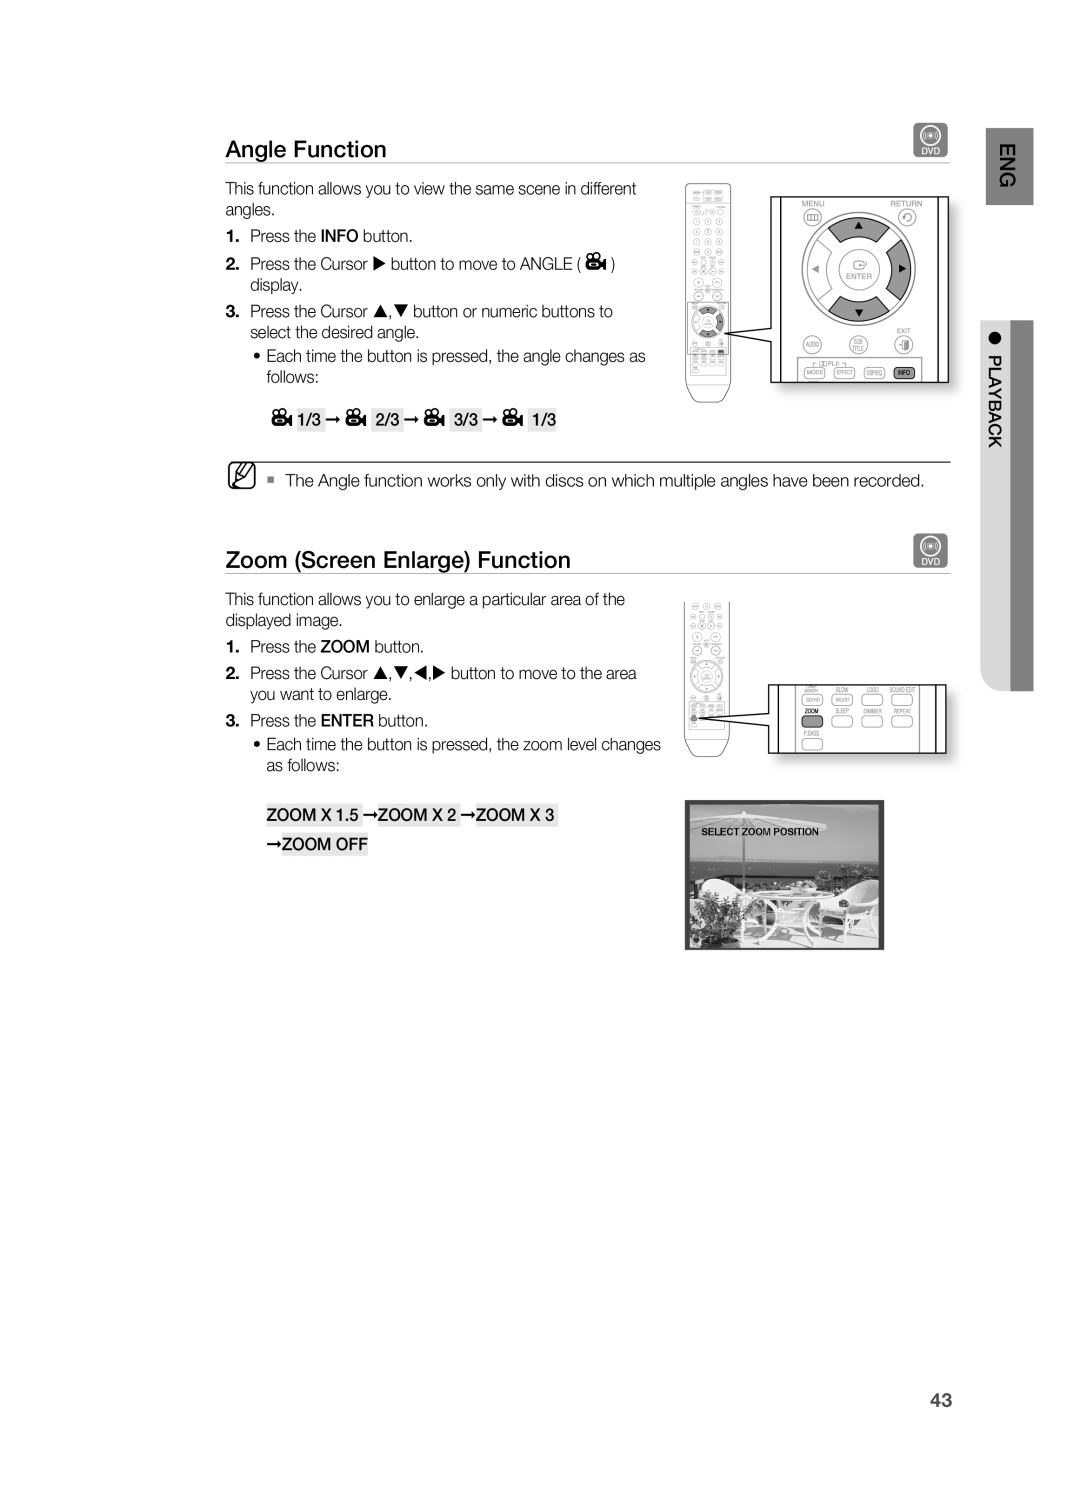 Samsung AH68-02055S manual angle function, Zoom Screen Enlarge function, Select Zoom Position 